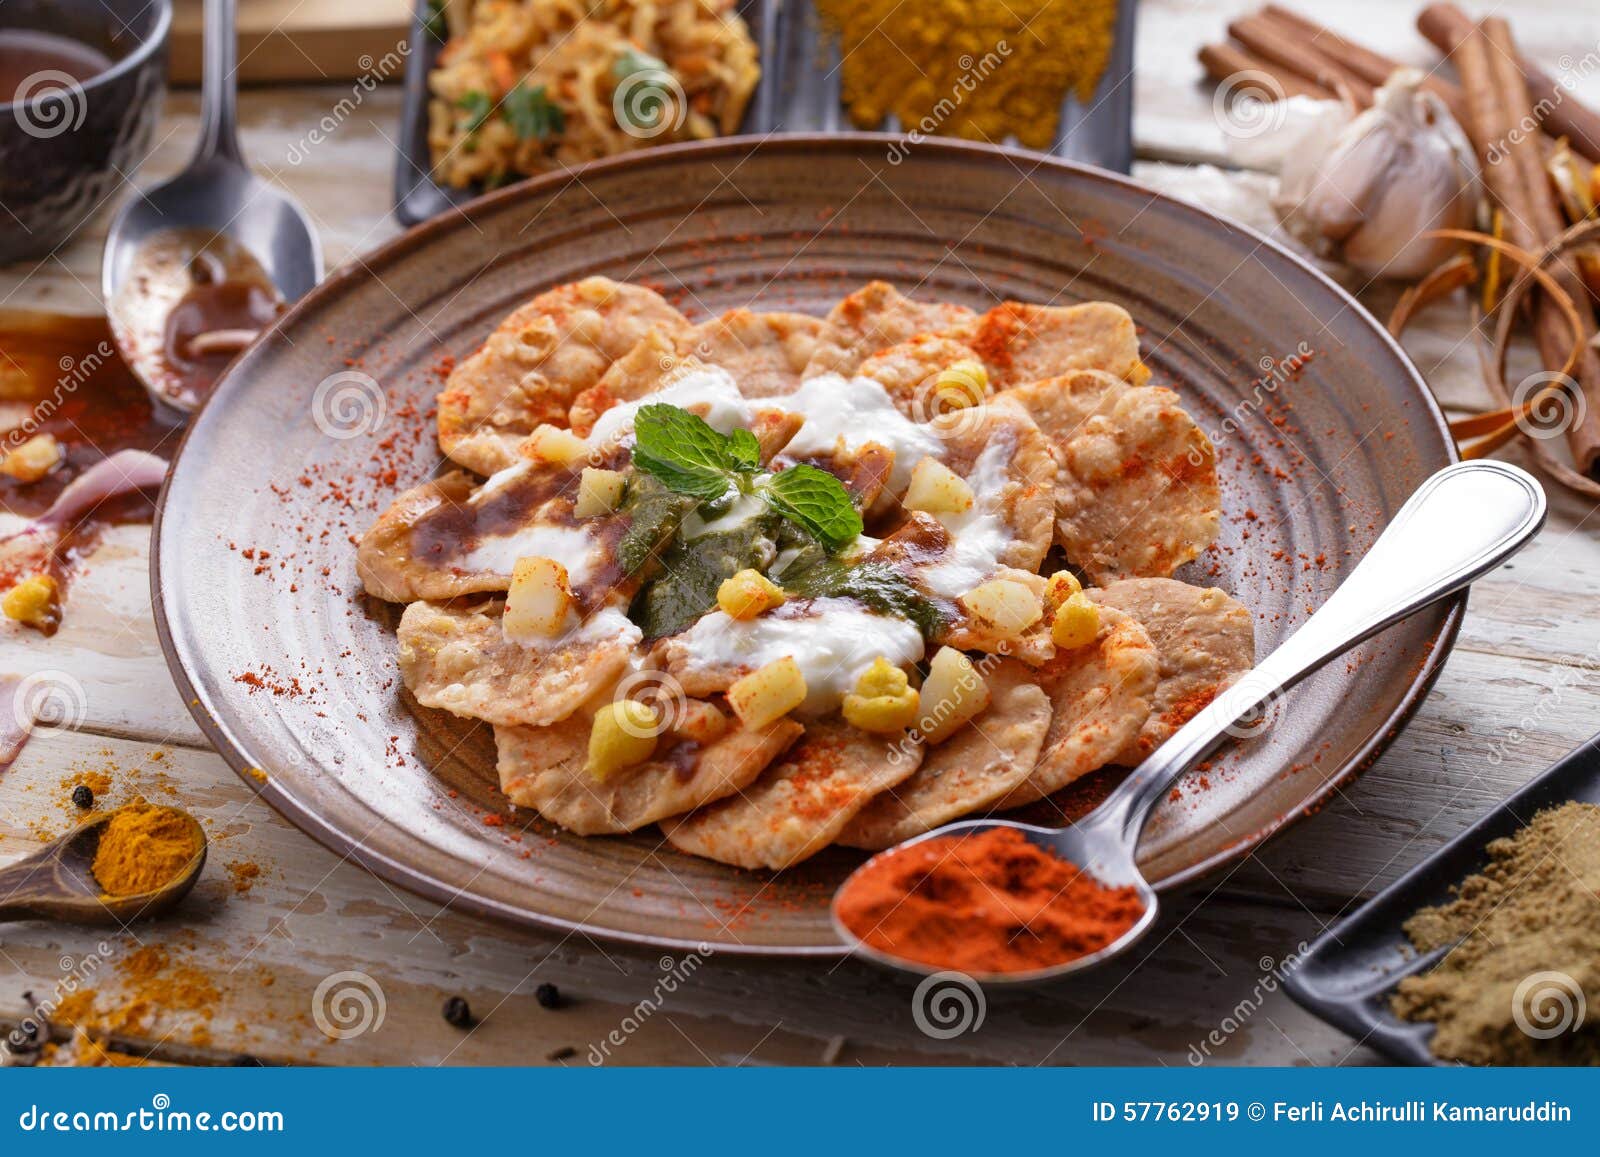 indian streetfood papri chaat garnished and served with yoghurt